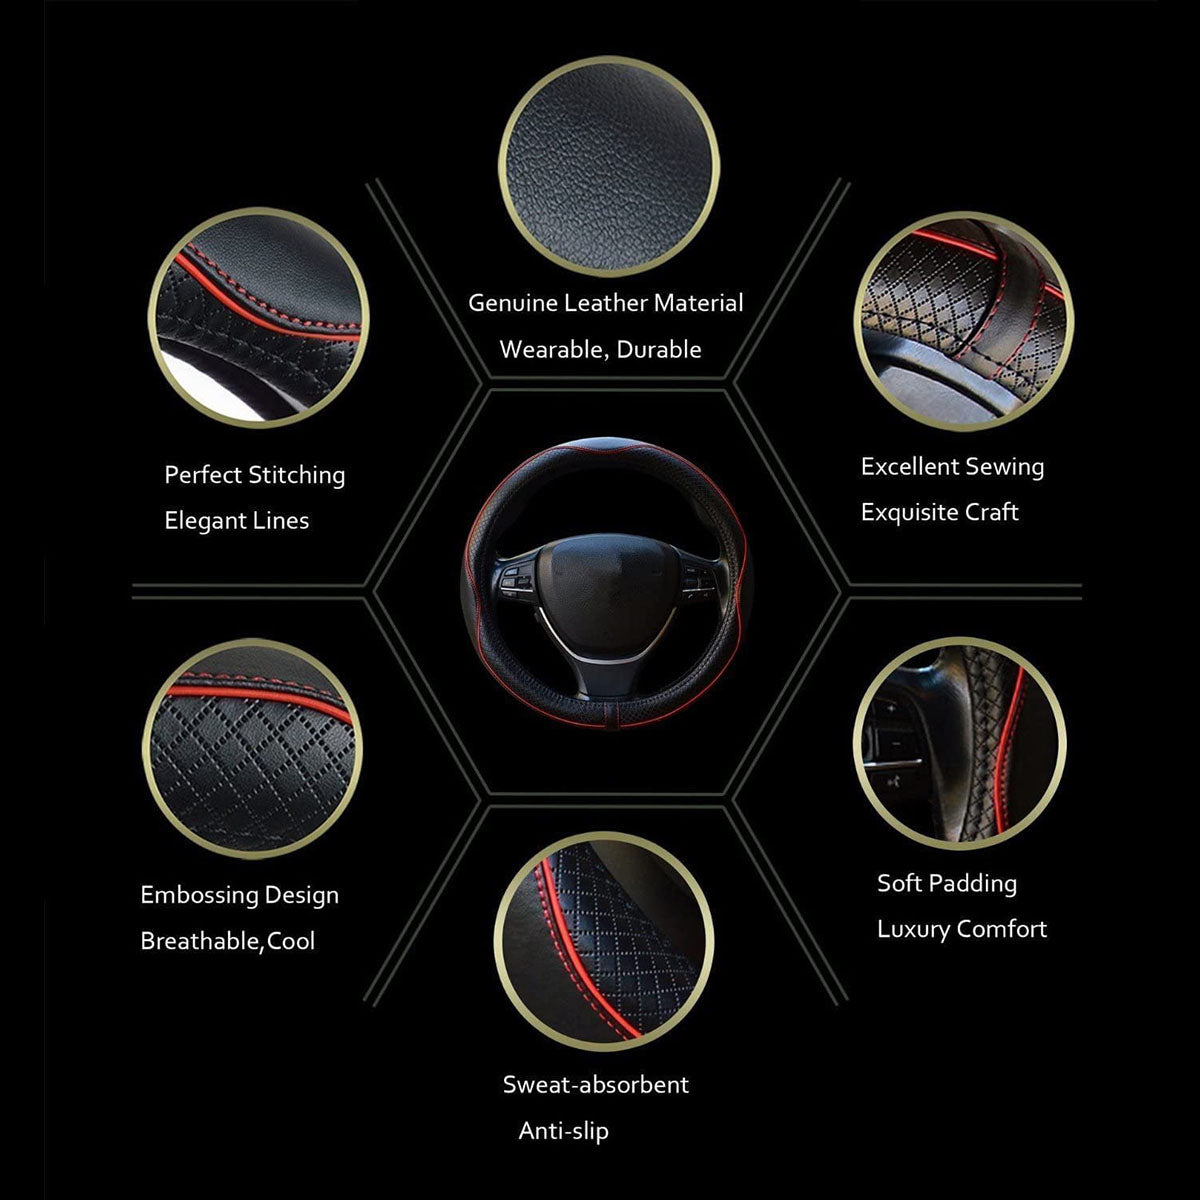 Car Steering Wheel Cover, Custom For Your Cars, Anti-Slip, Safety, Soft, Breathable, Heavy Duty, Thick, Full Surround, Sports Style, Car Accessories LM18990